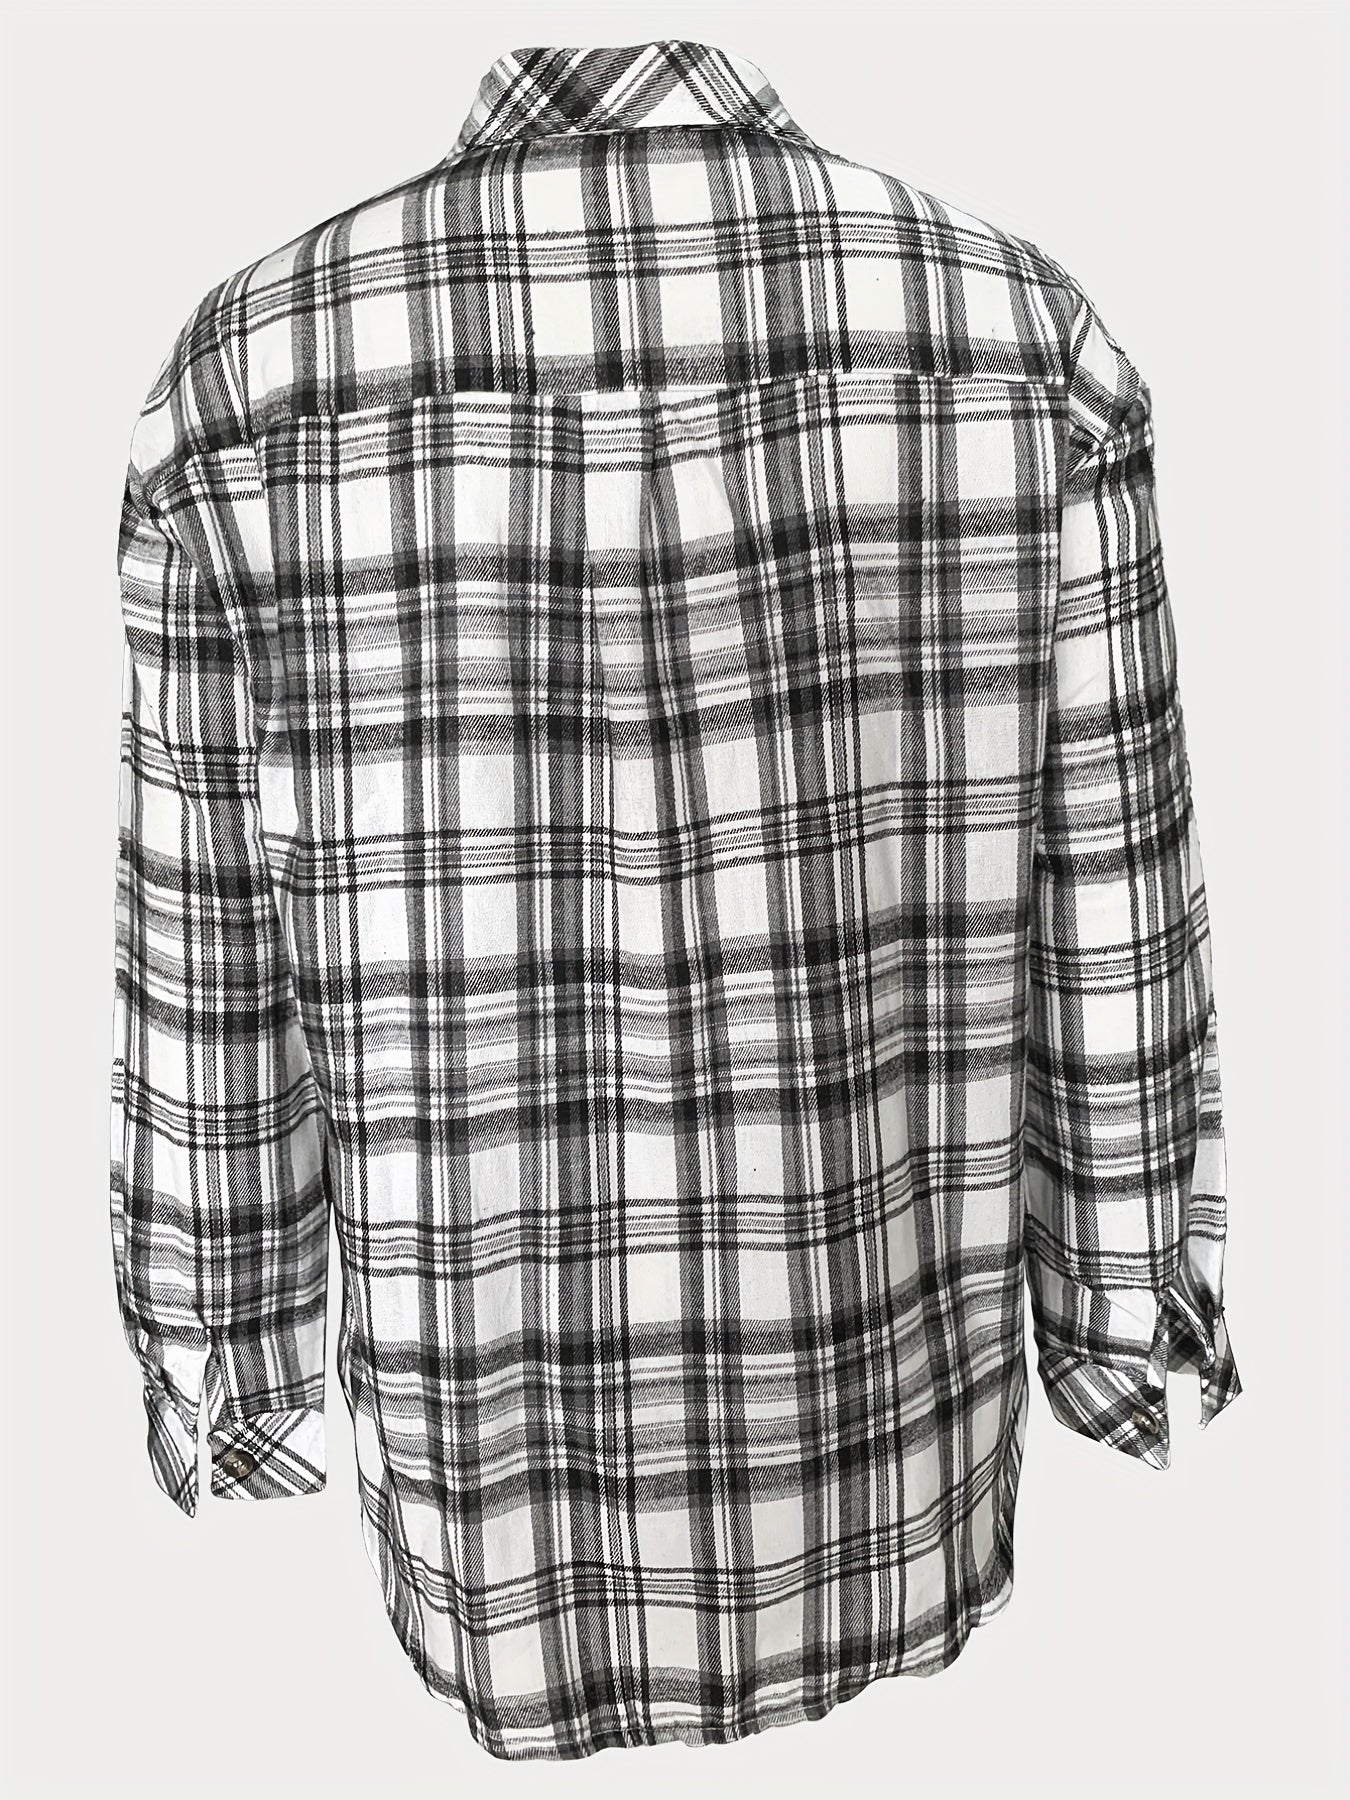 Antmvs Plaid Print Classic Shirt, Casual Button Front Long Sleeve Shirt With A Collar, Women's Clothing